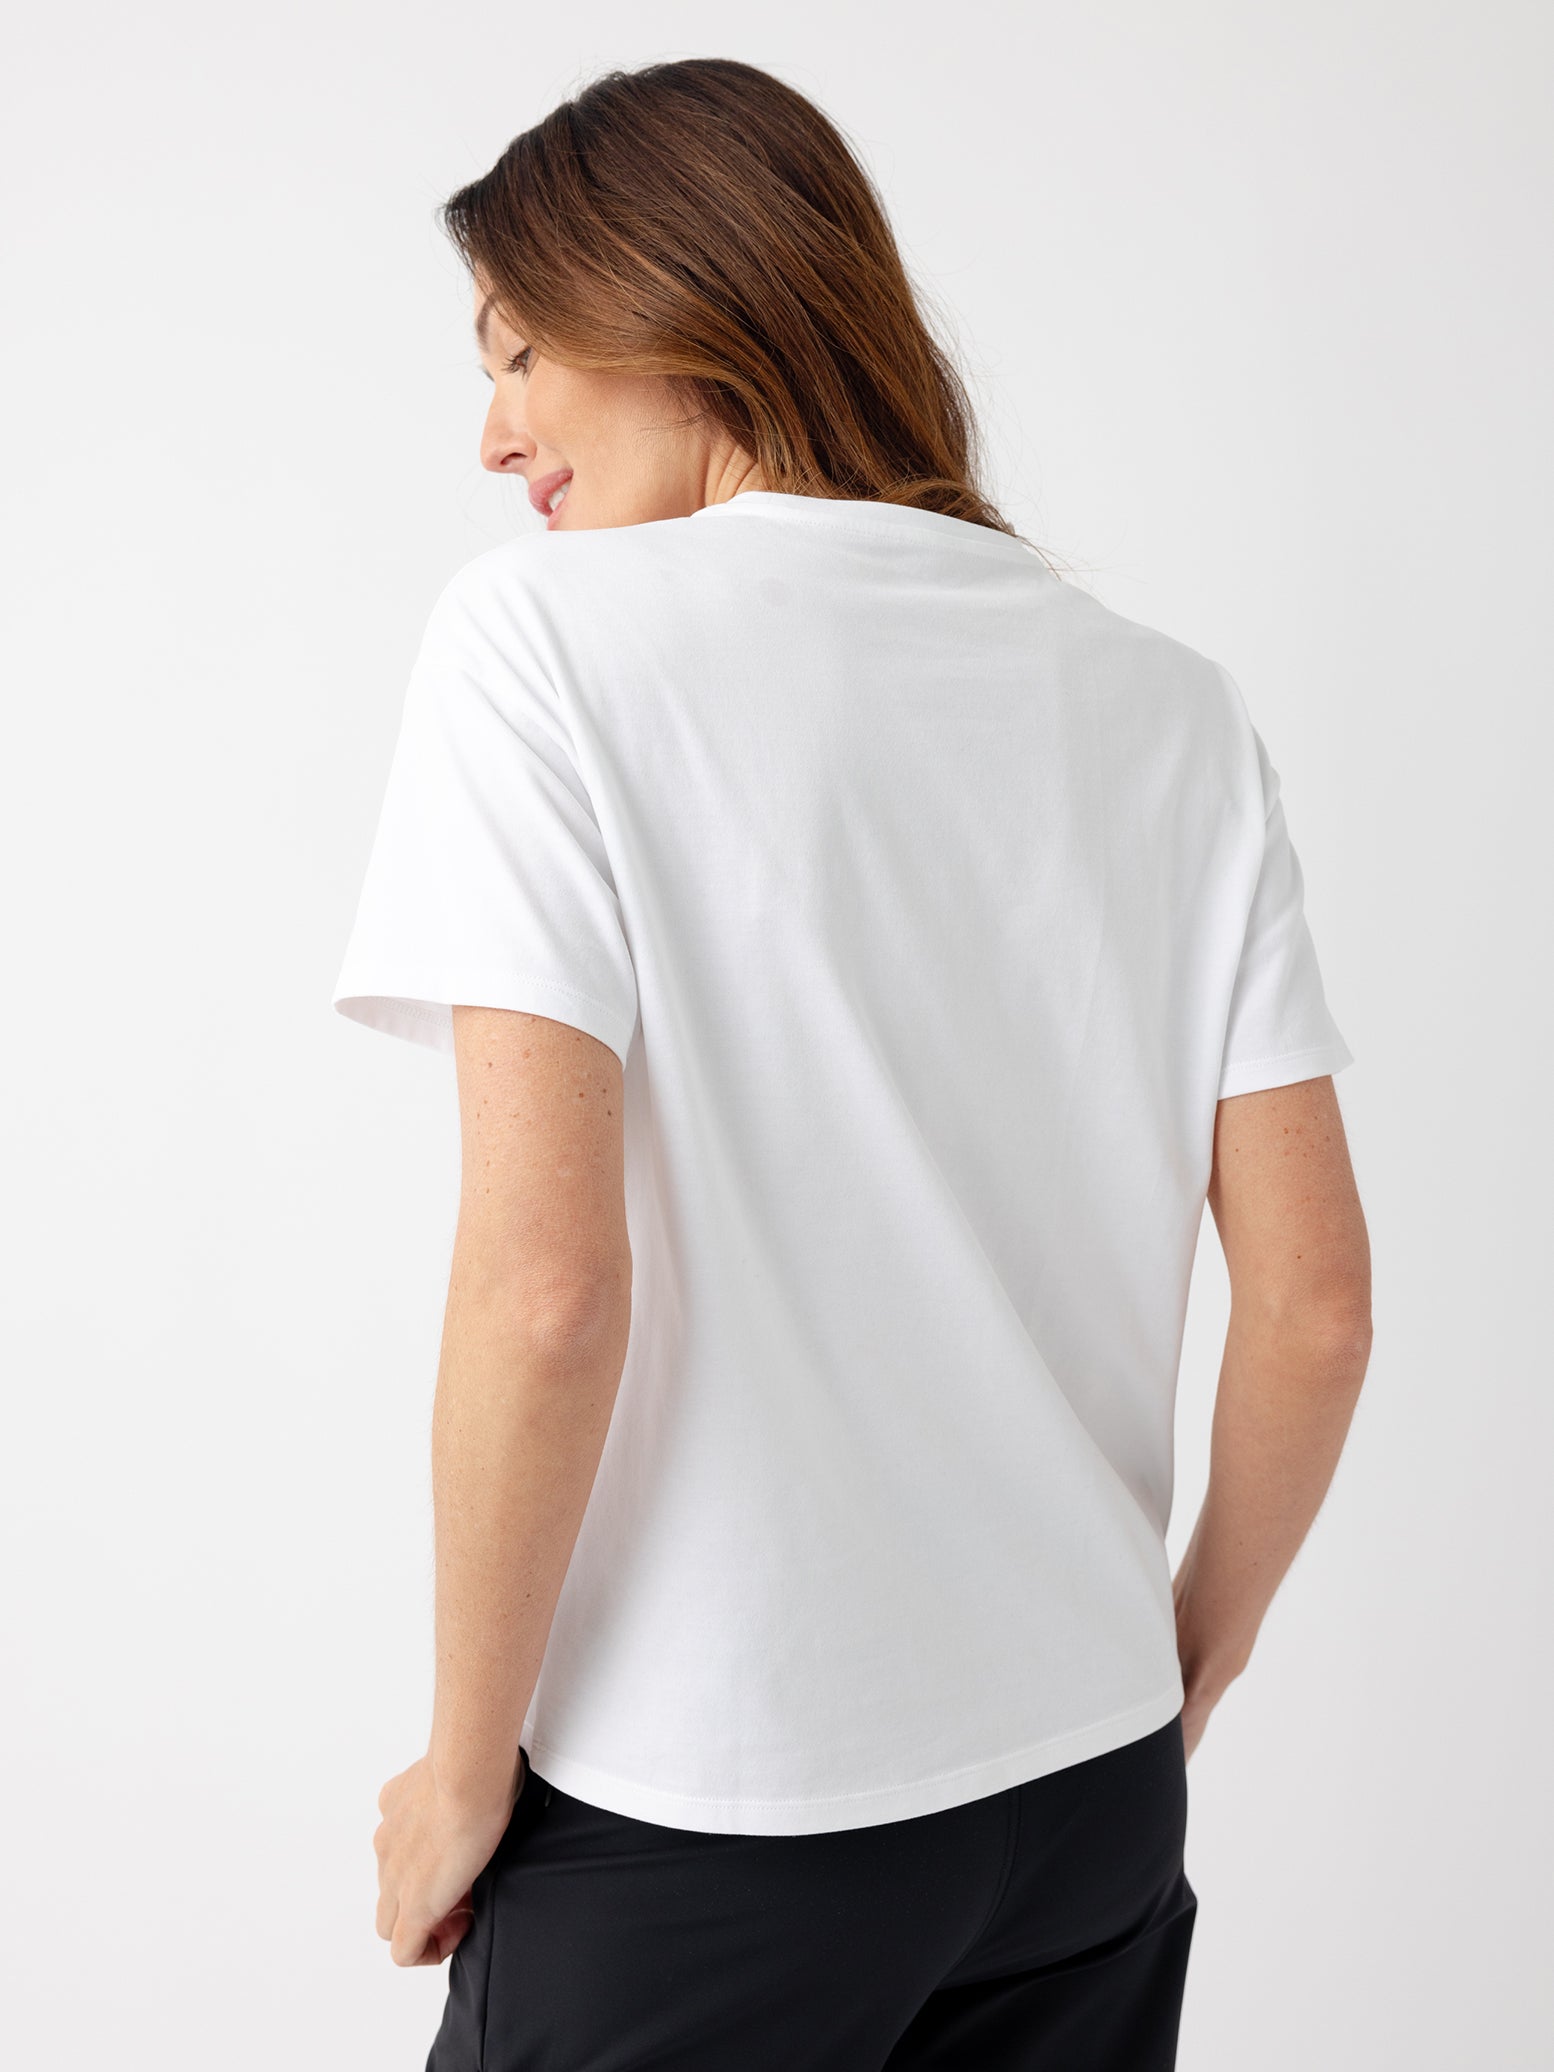 Back of woman wearing white tee 